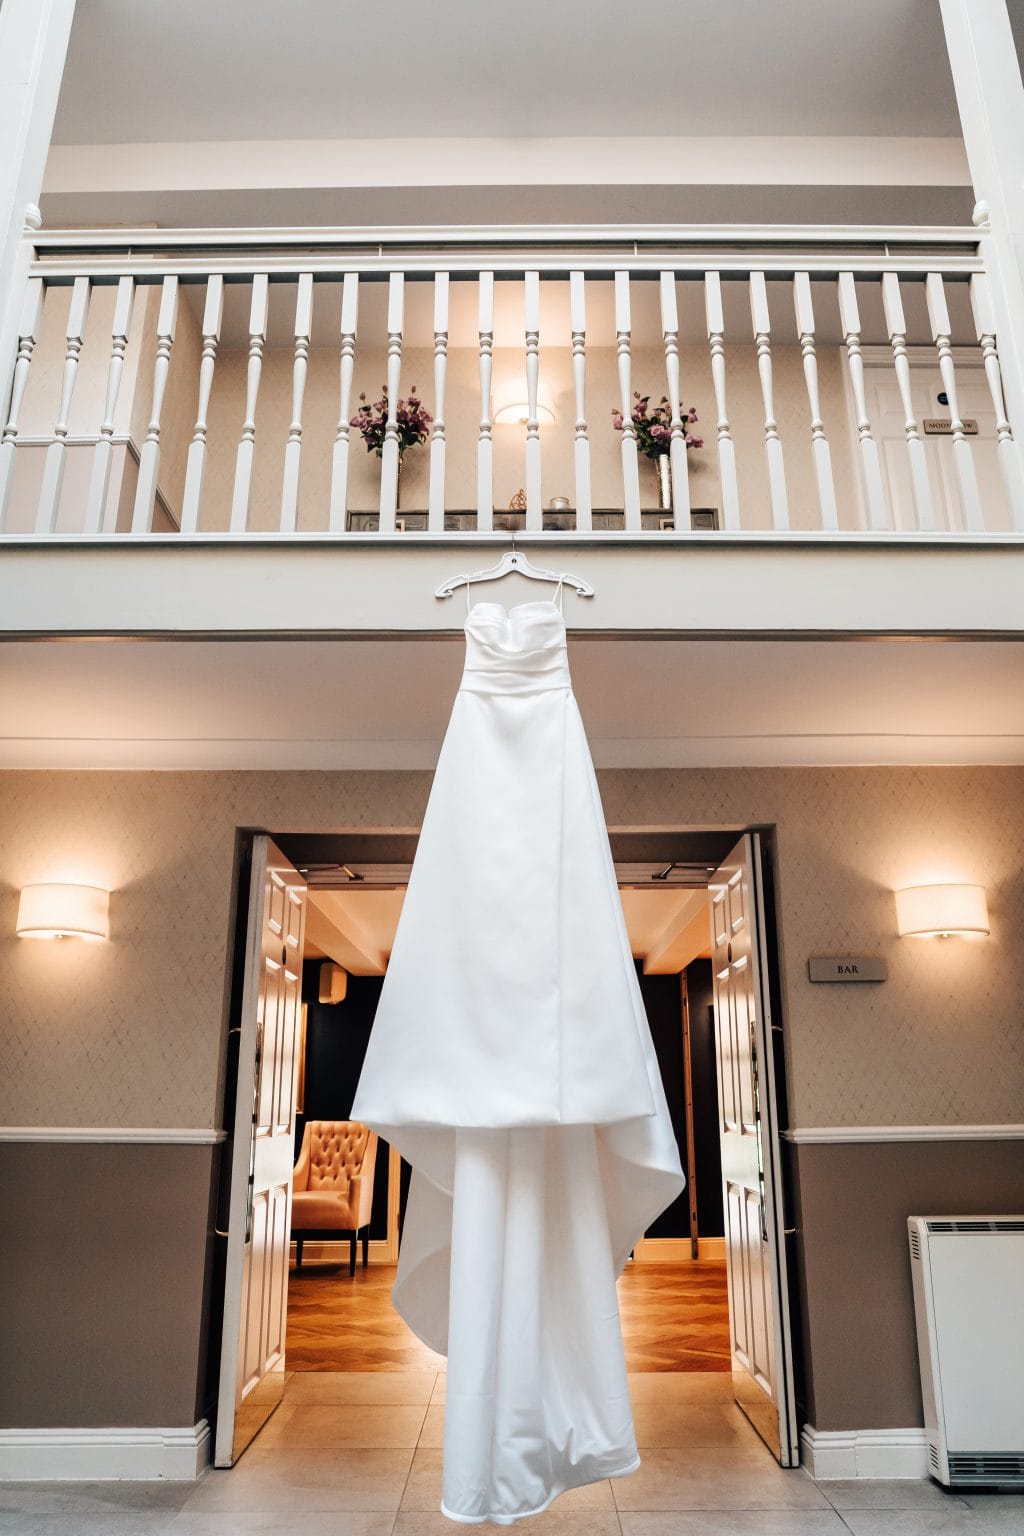 Wedding dress hangs over the stair bannister at The Pear Tree wedding venue in Swindon.